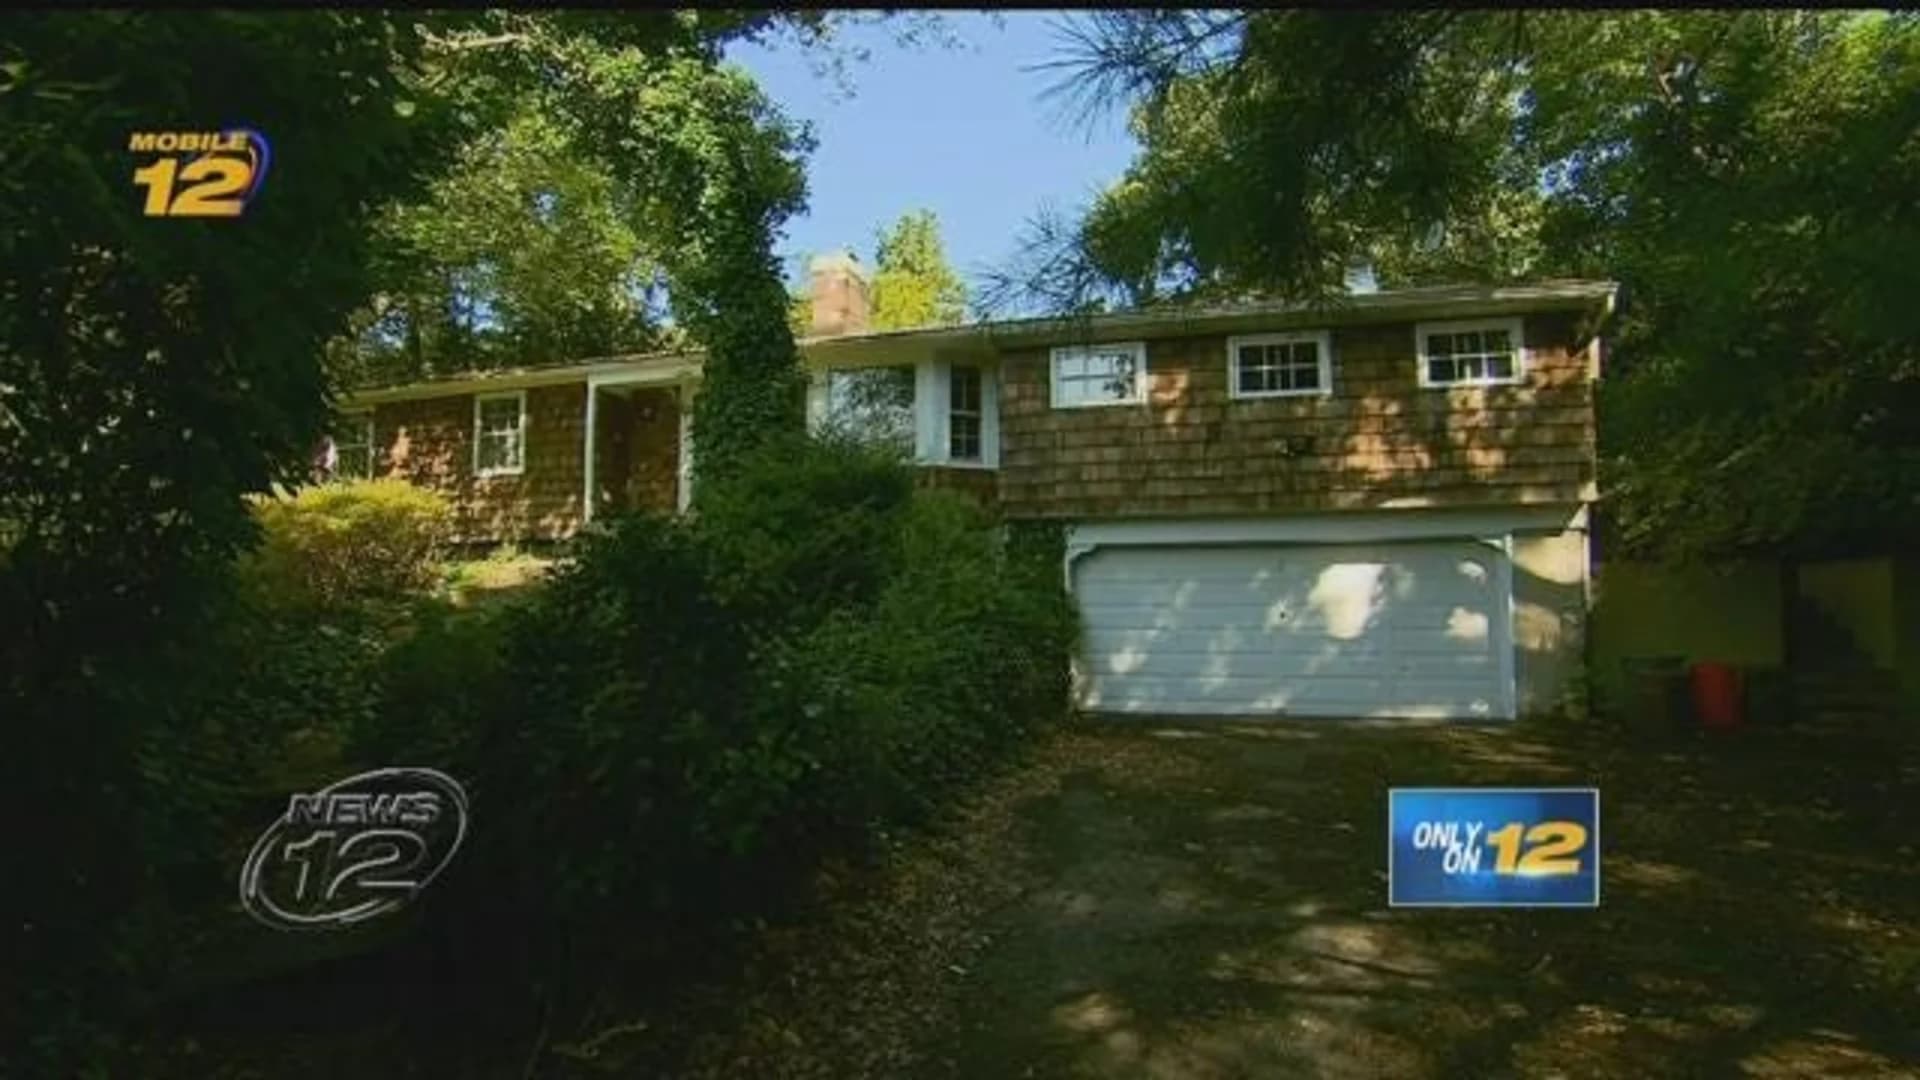 Smithtown residents upset with possible group home in area